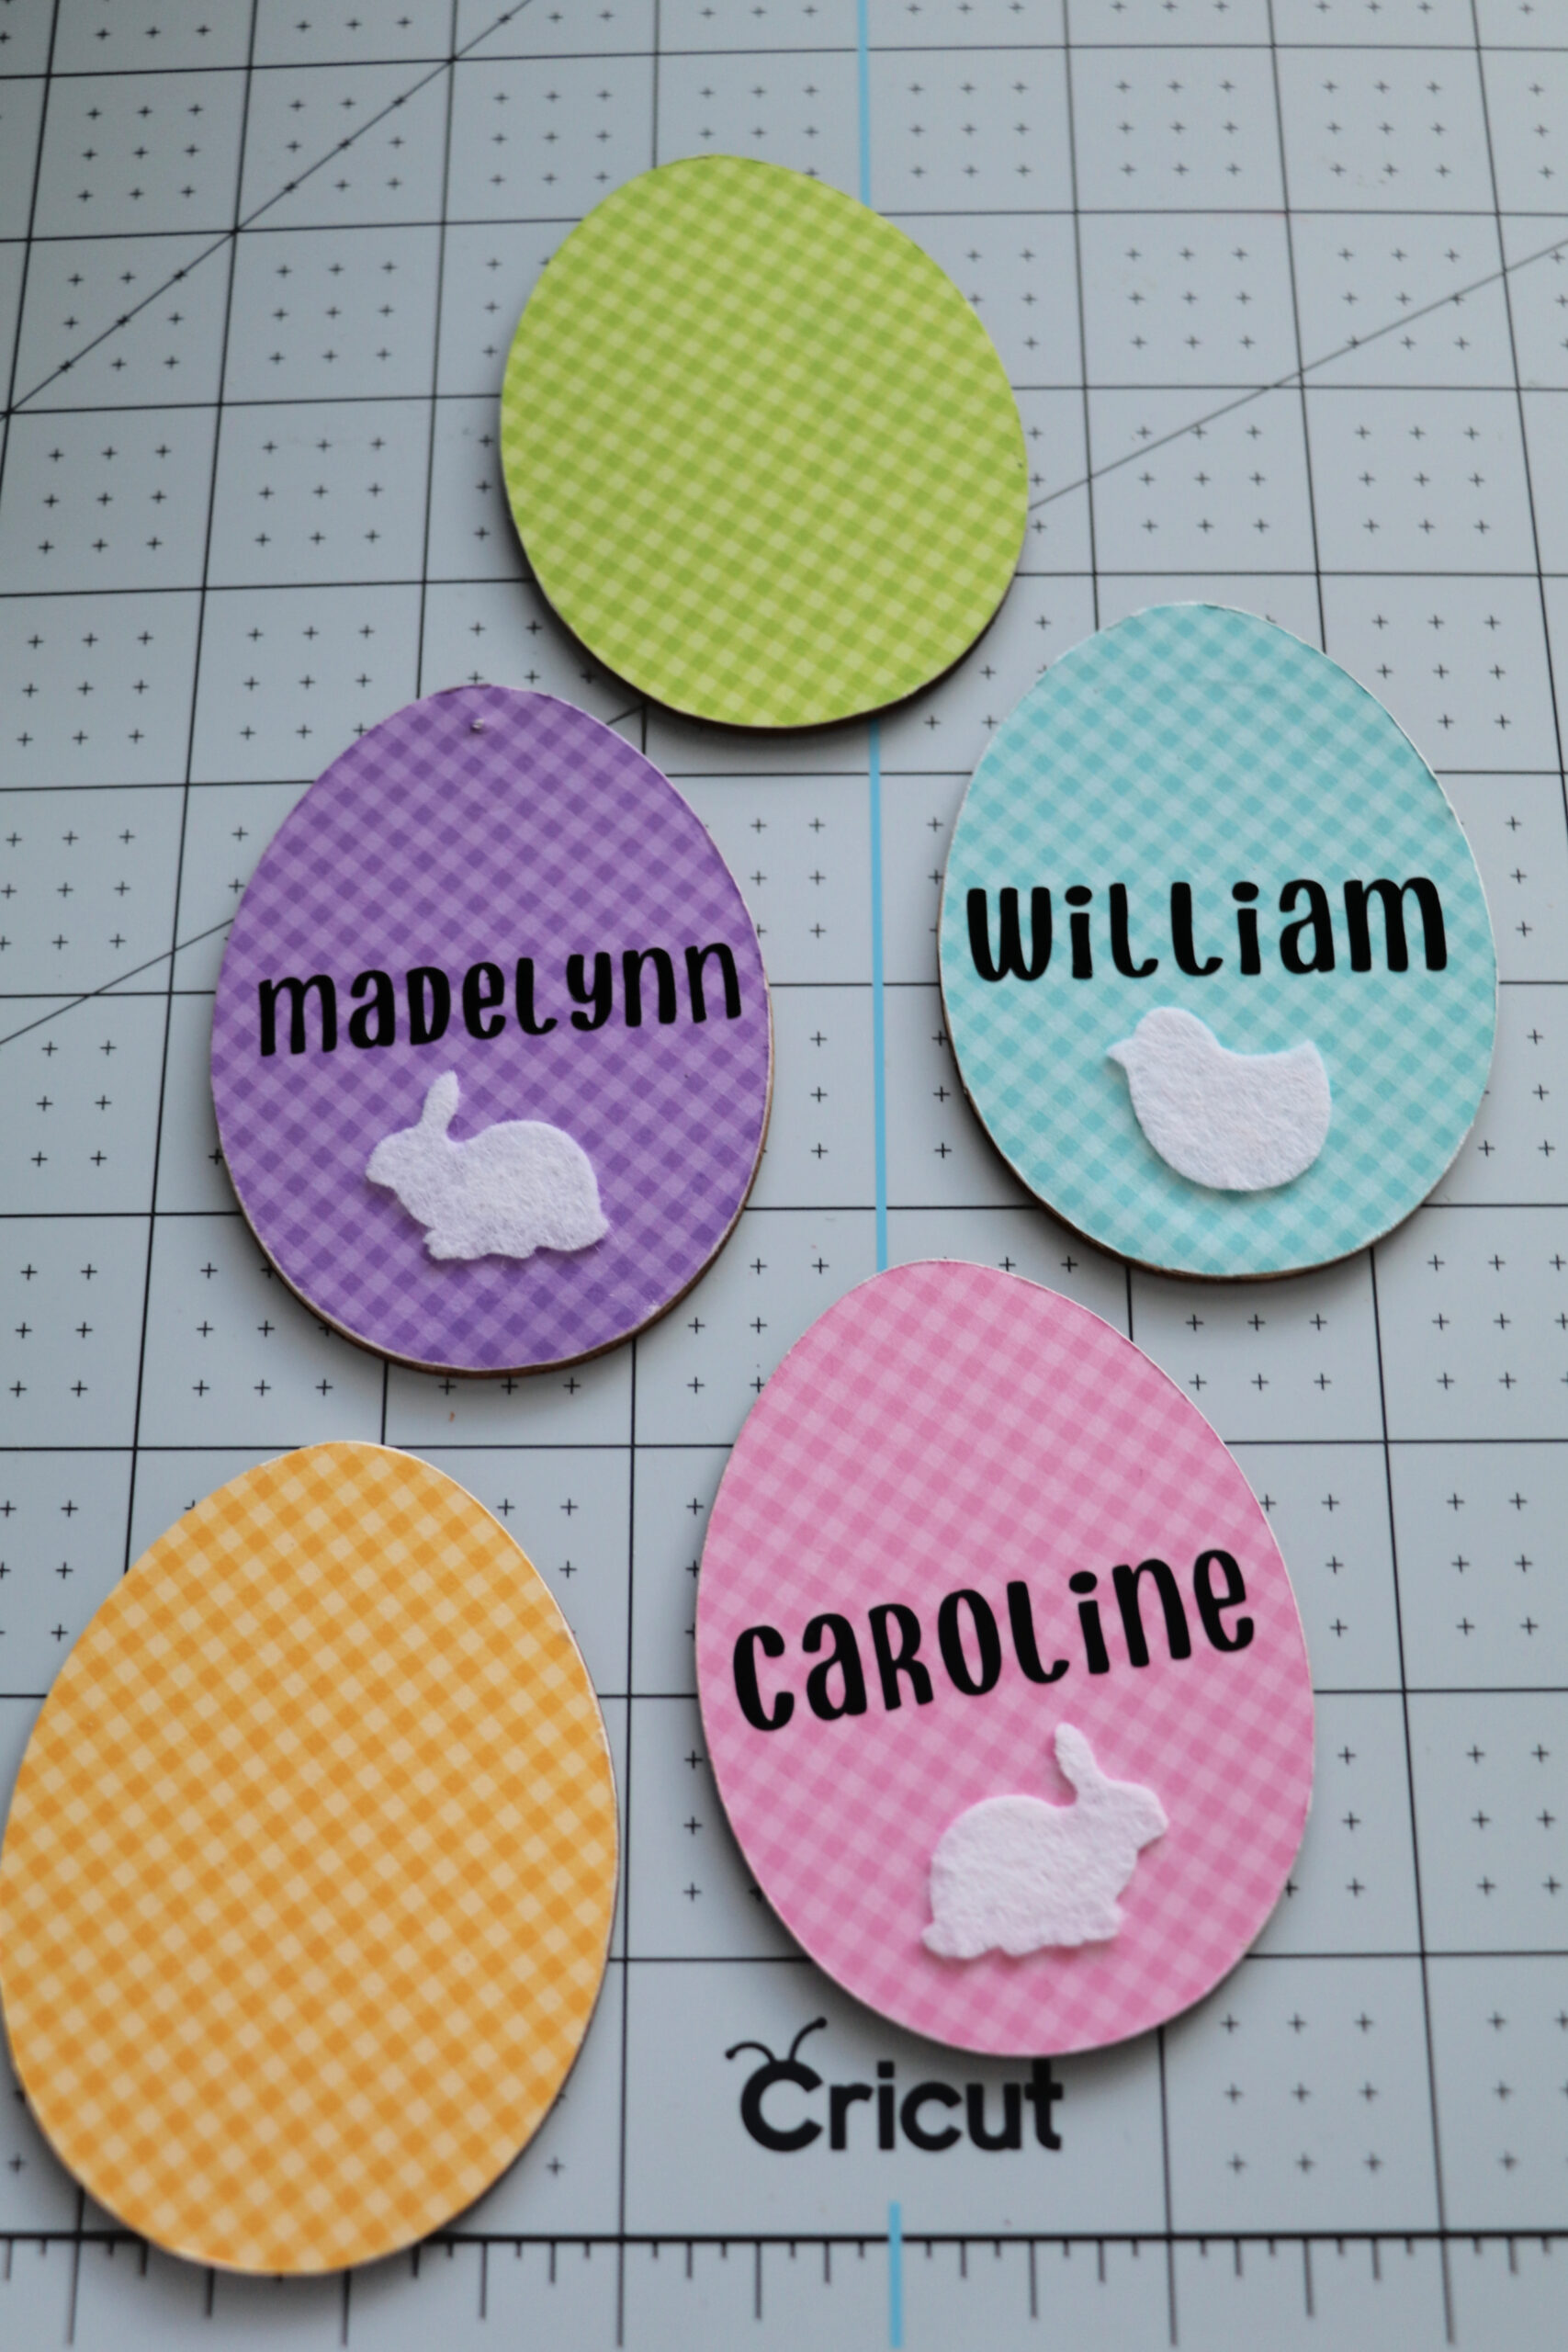 Free printable Easter basket name tags. The template can also be used for  creating items like labels and plac…